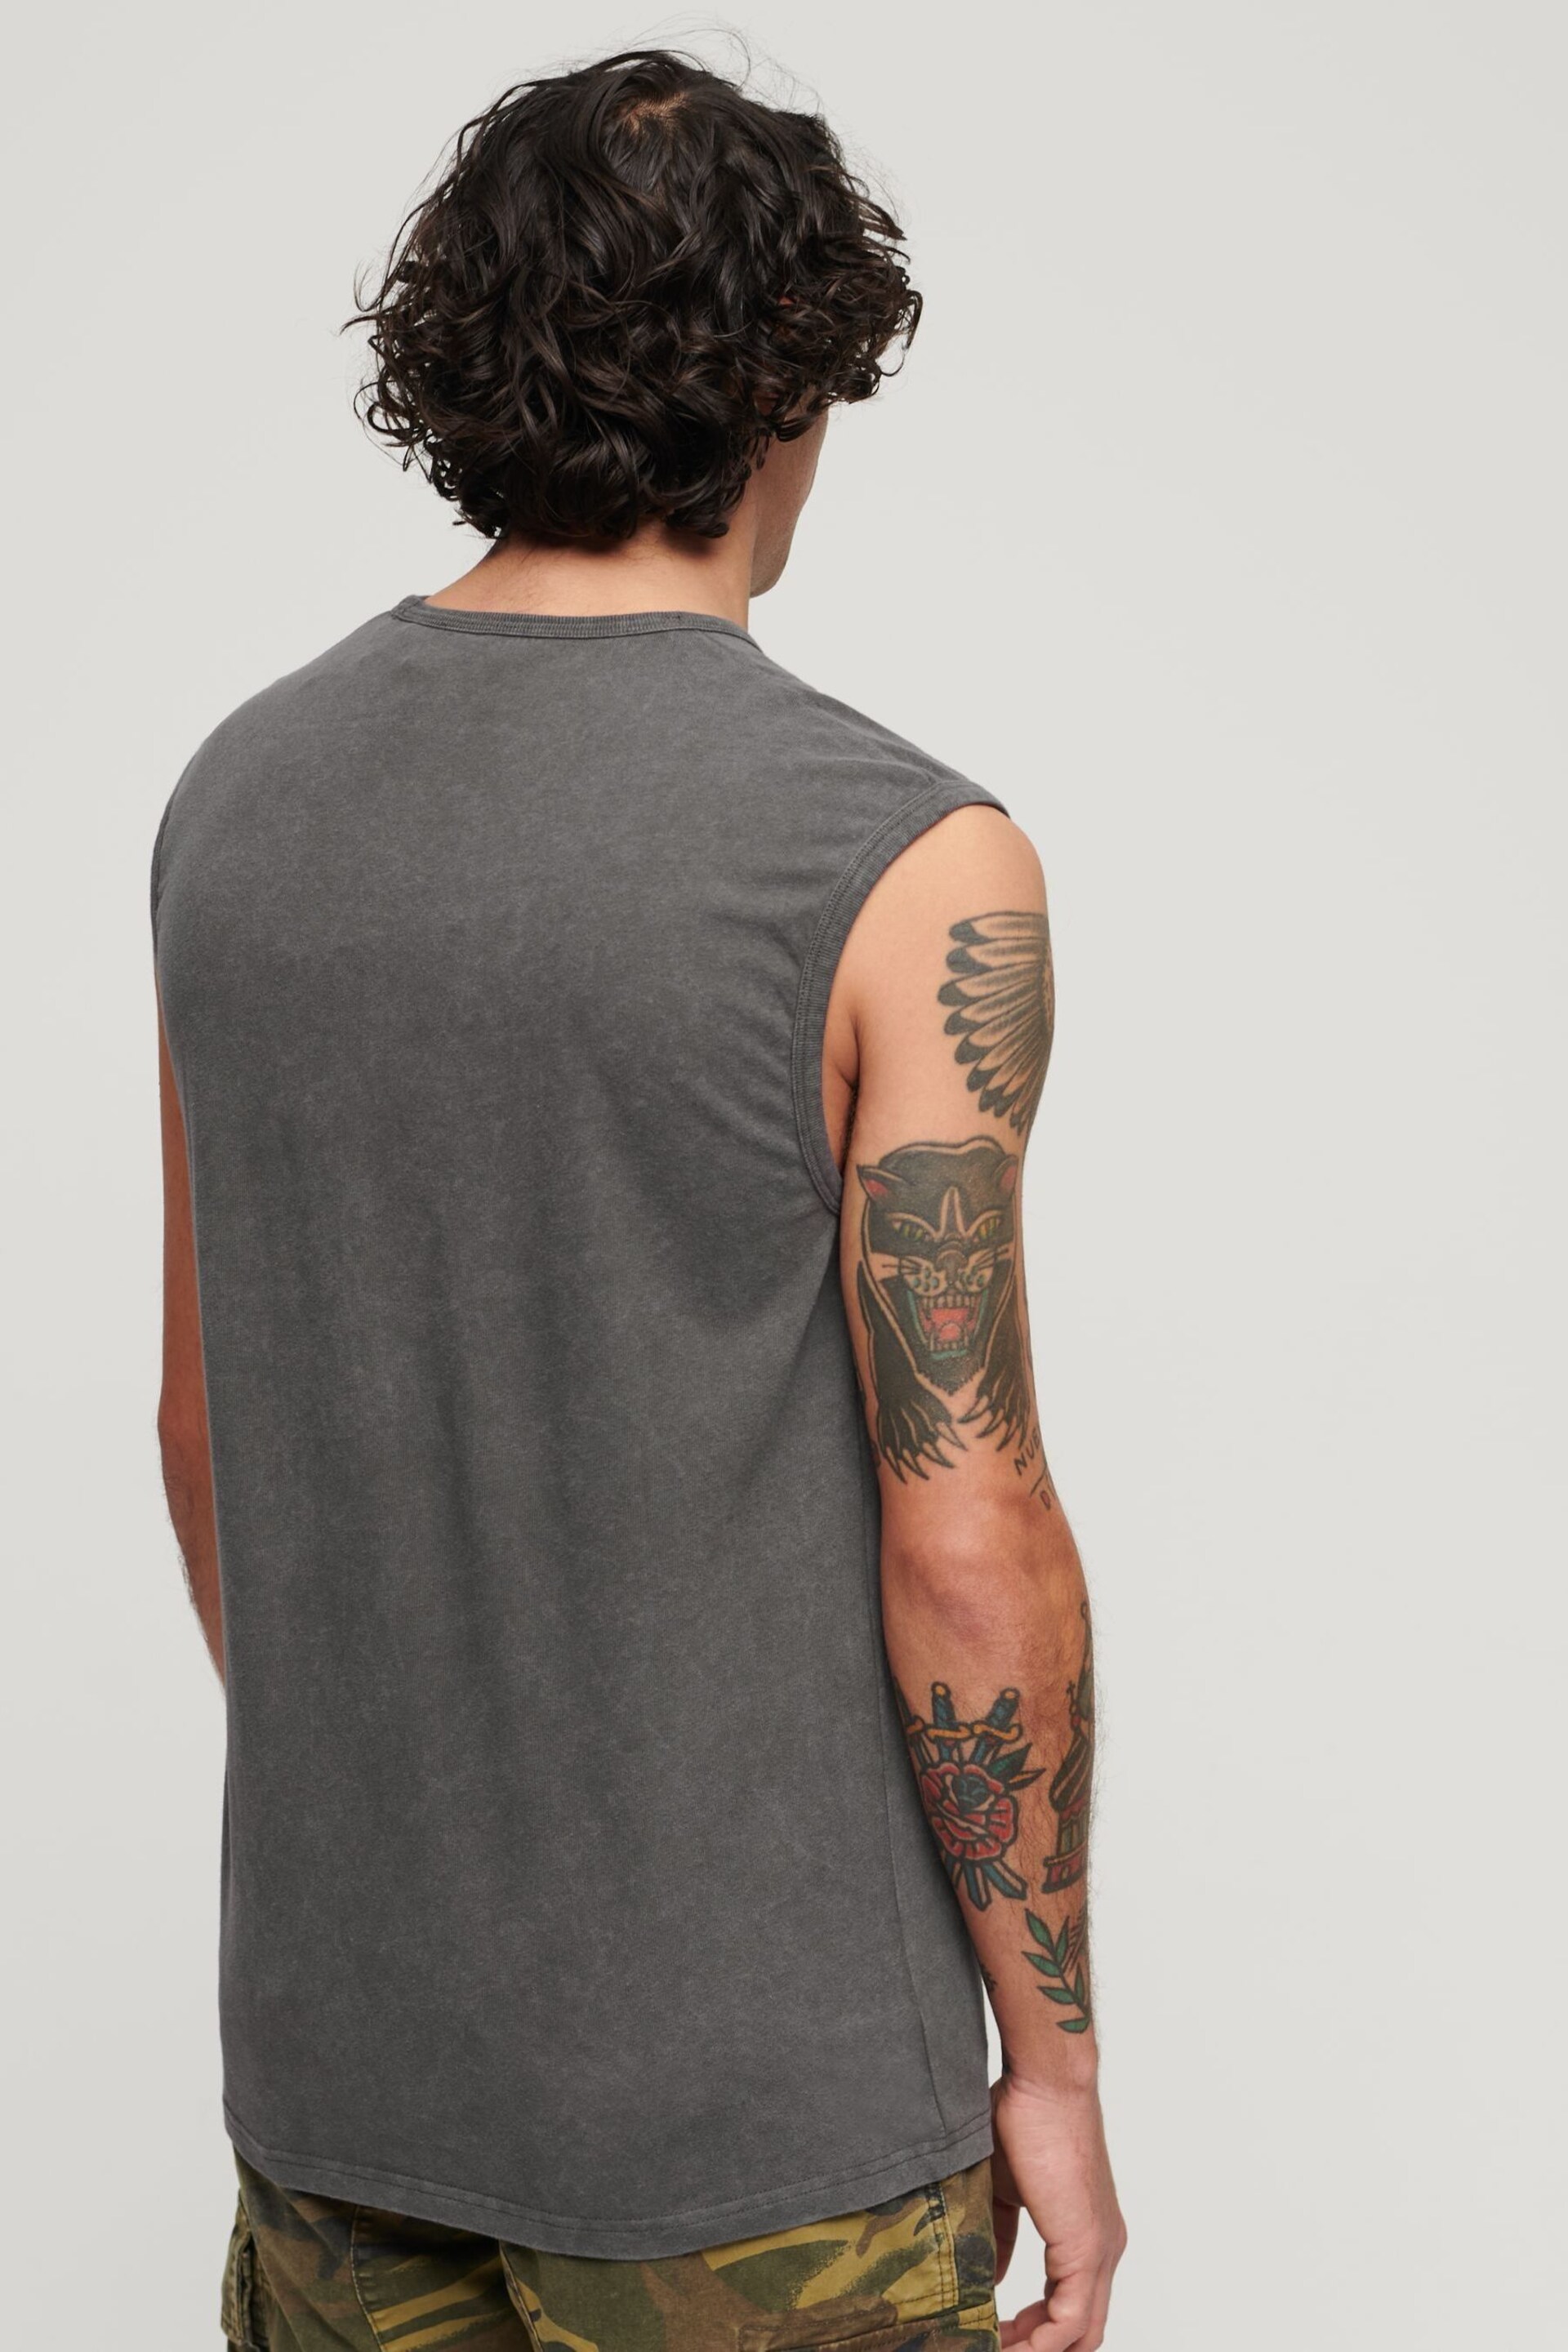 Superdry Grey Rock Graphic Band Tank Top - Image 2 of 3